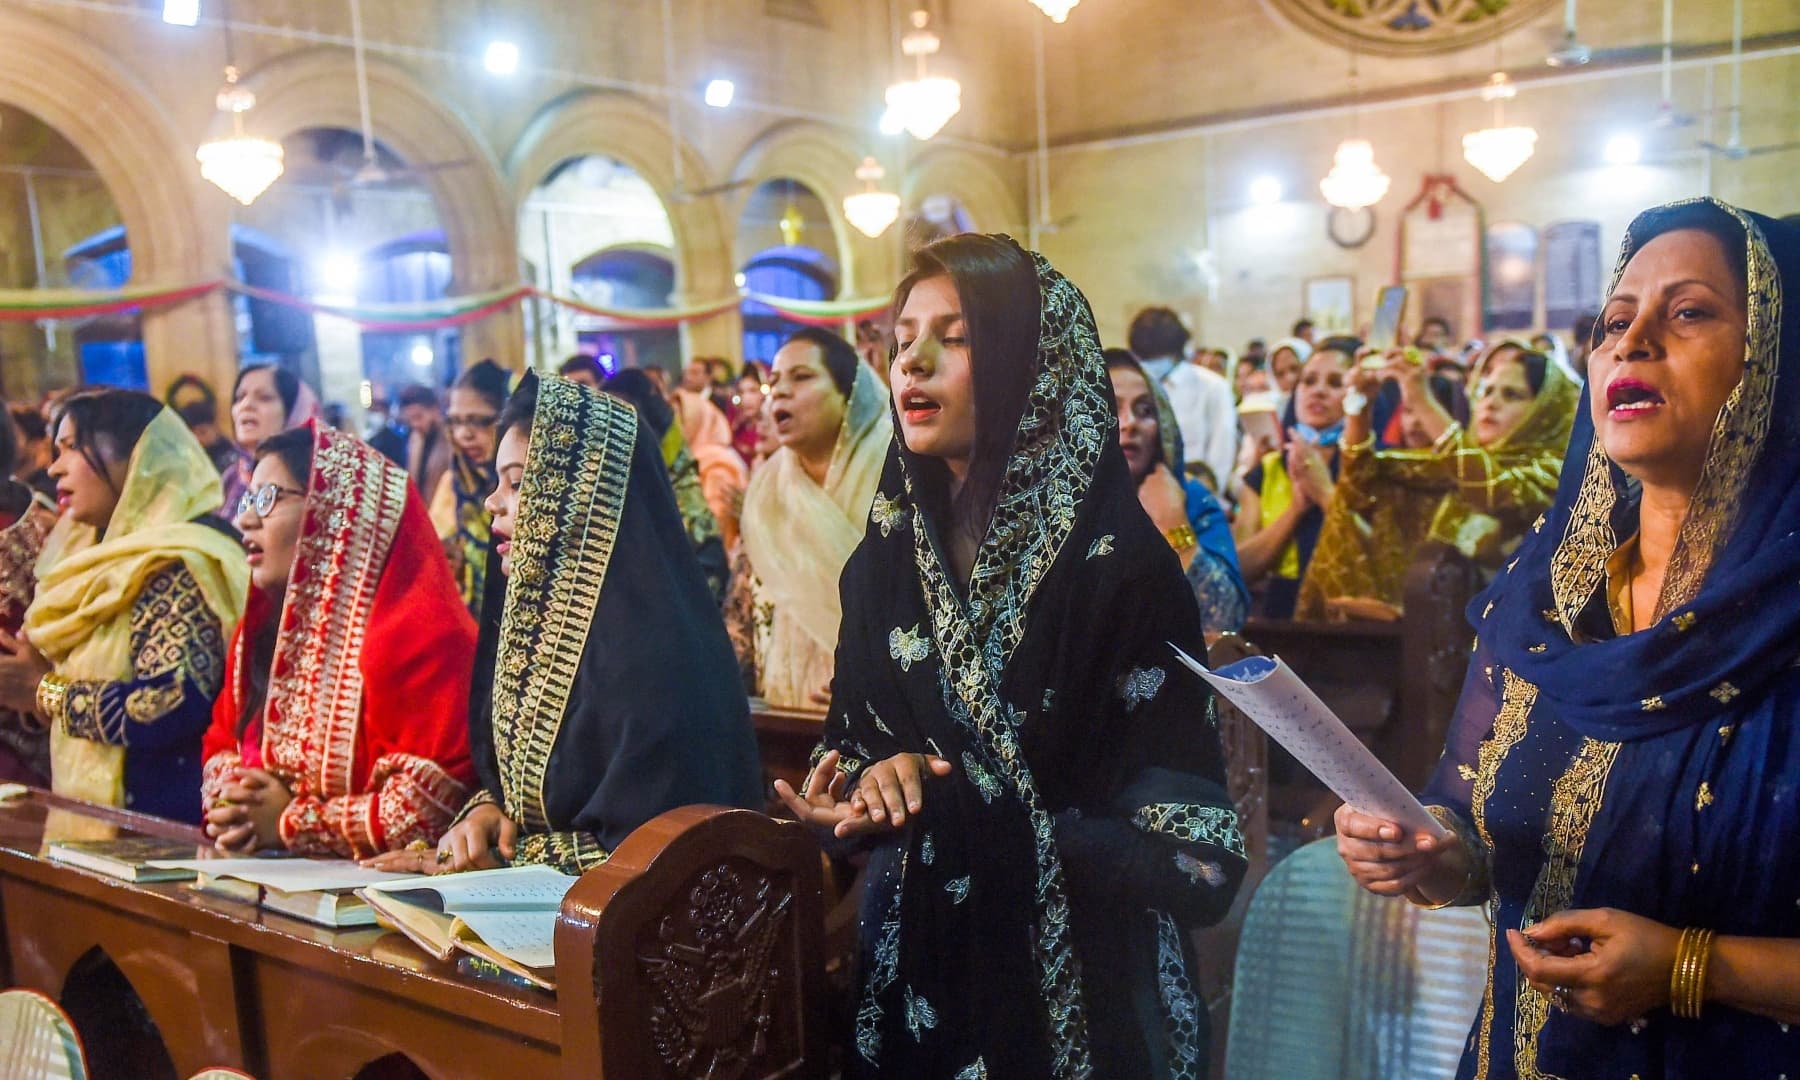 Christian devotees pray at Saint Andrew Church to celebrate Christmas in Karachi on December 24, 2021. — AFP